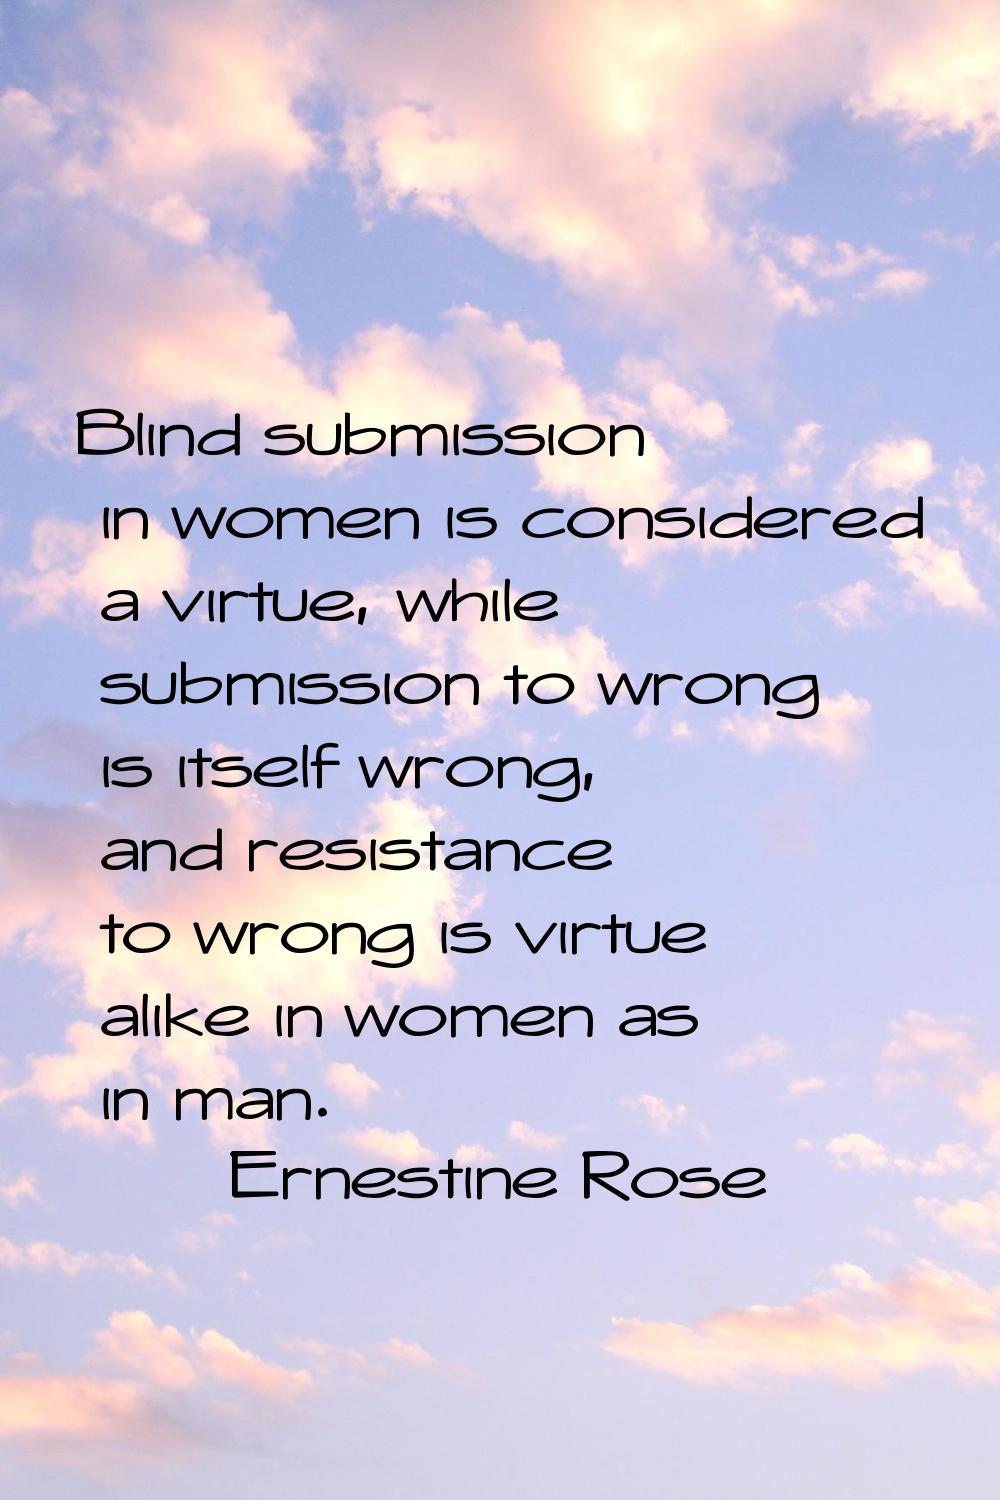 Blind submission in women is considered a virtue, while submission to wrong is itself wrong, and re